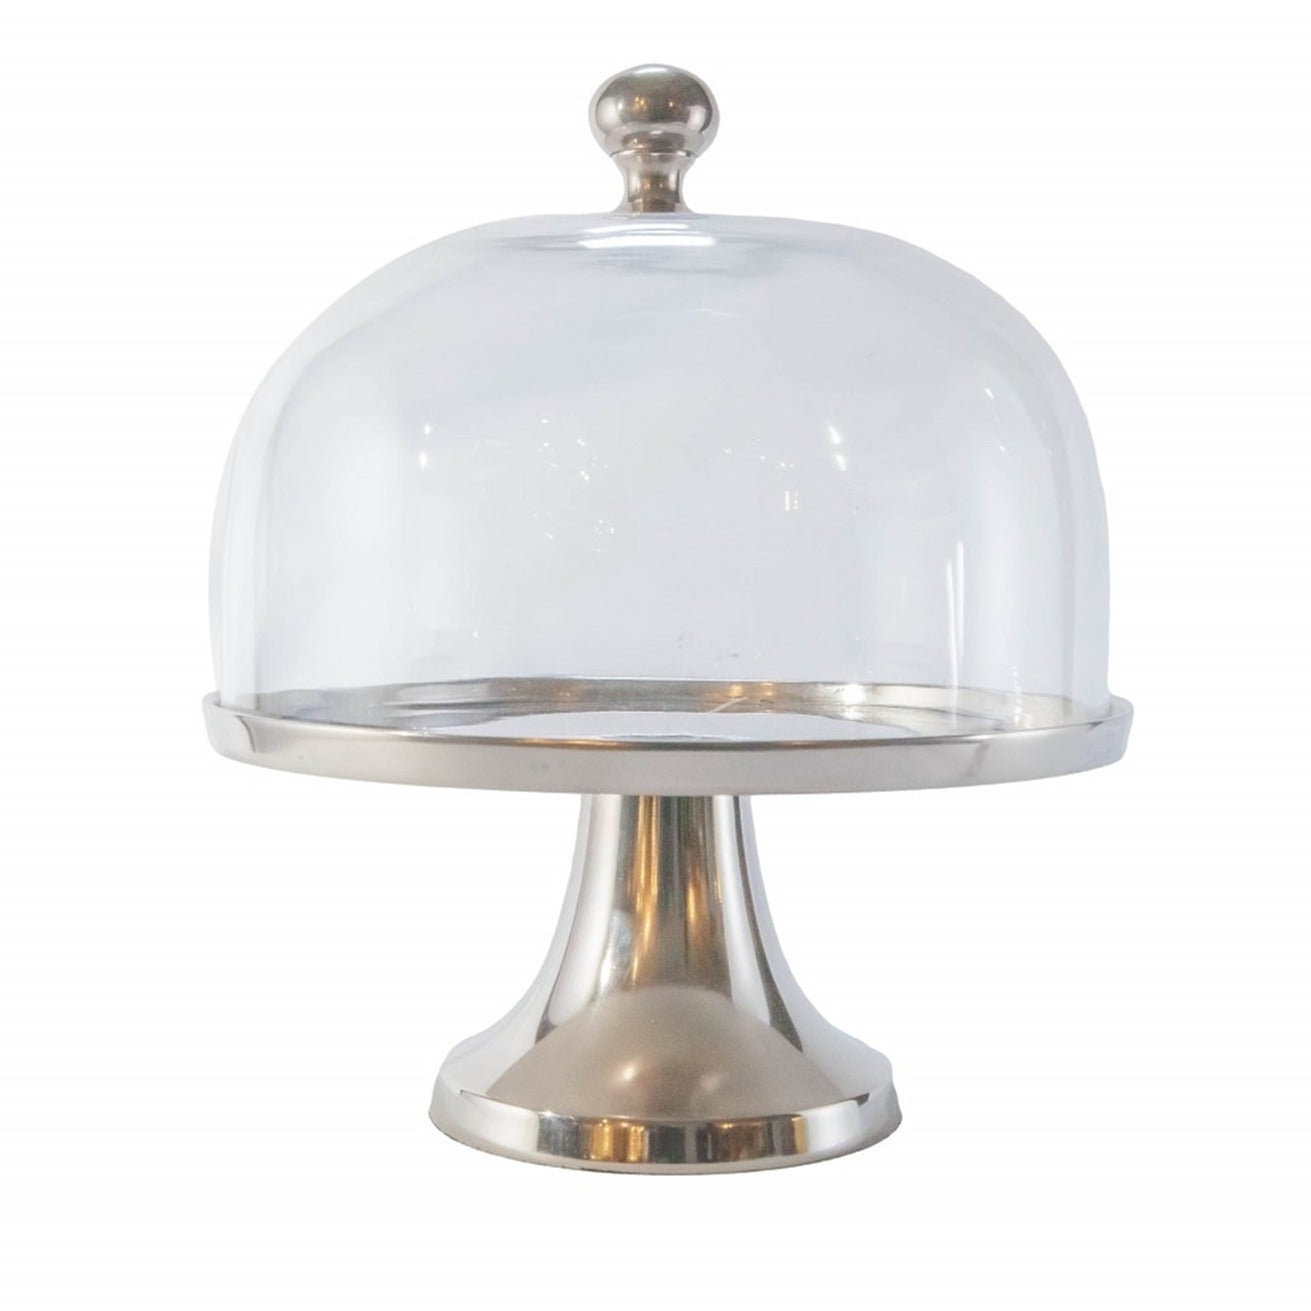 Aluminum serving stand with glass dome on white background